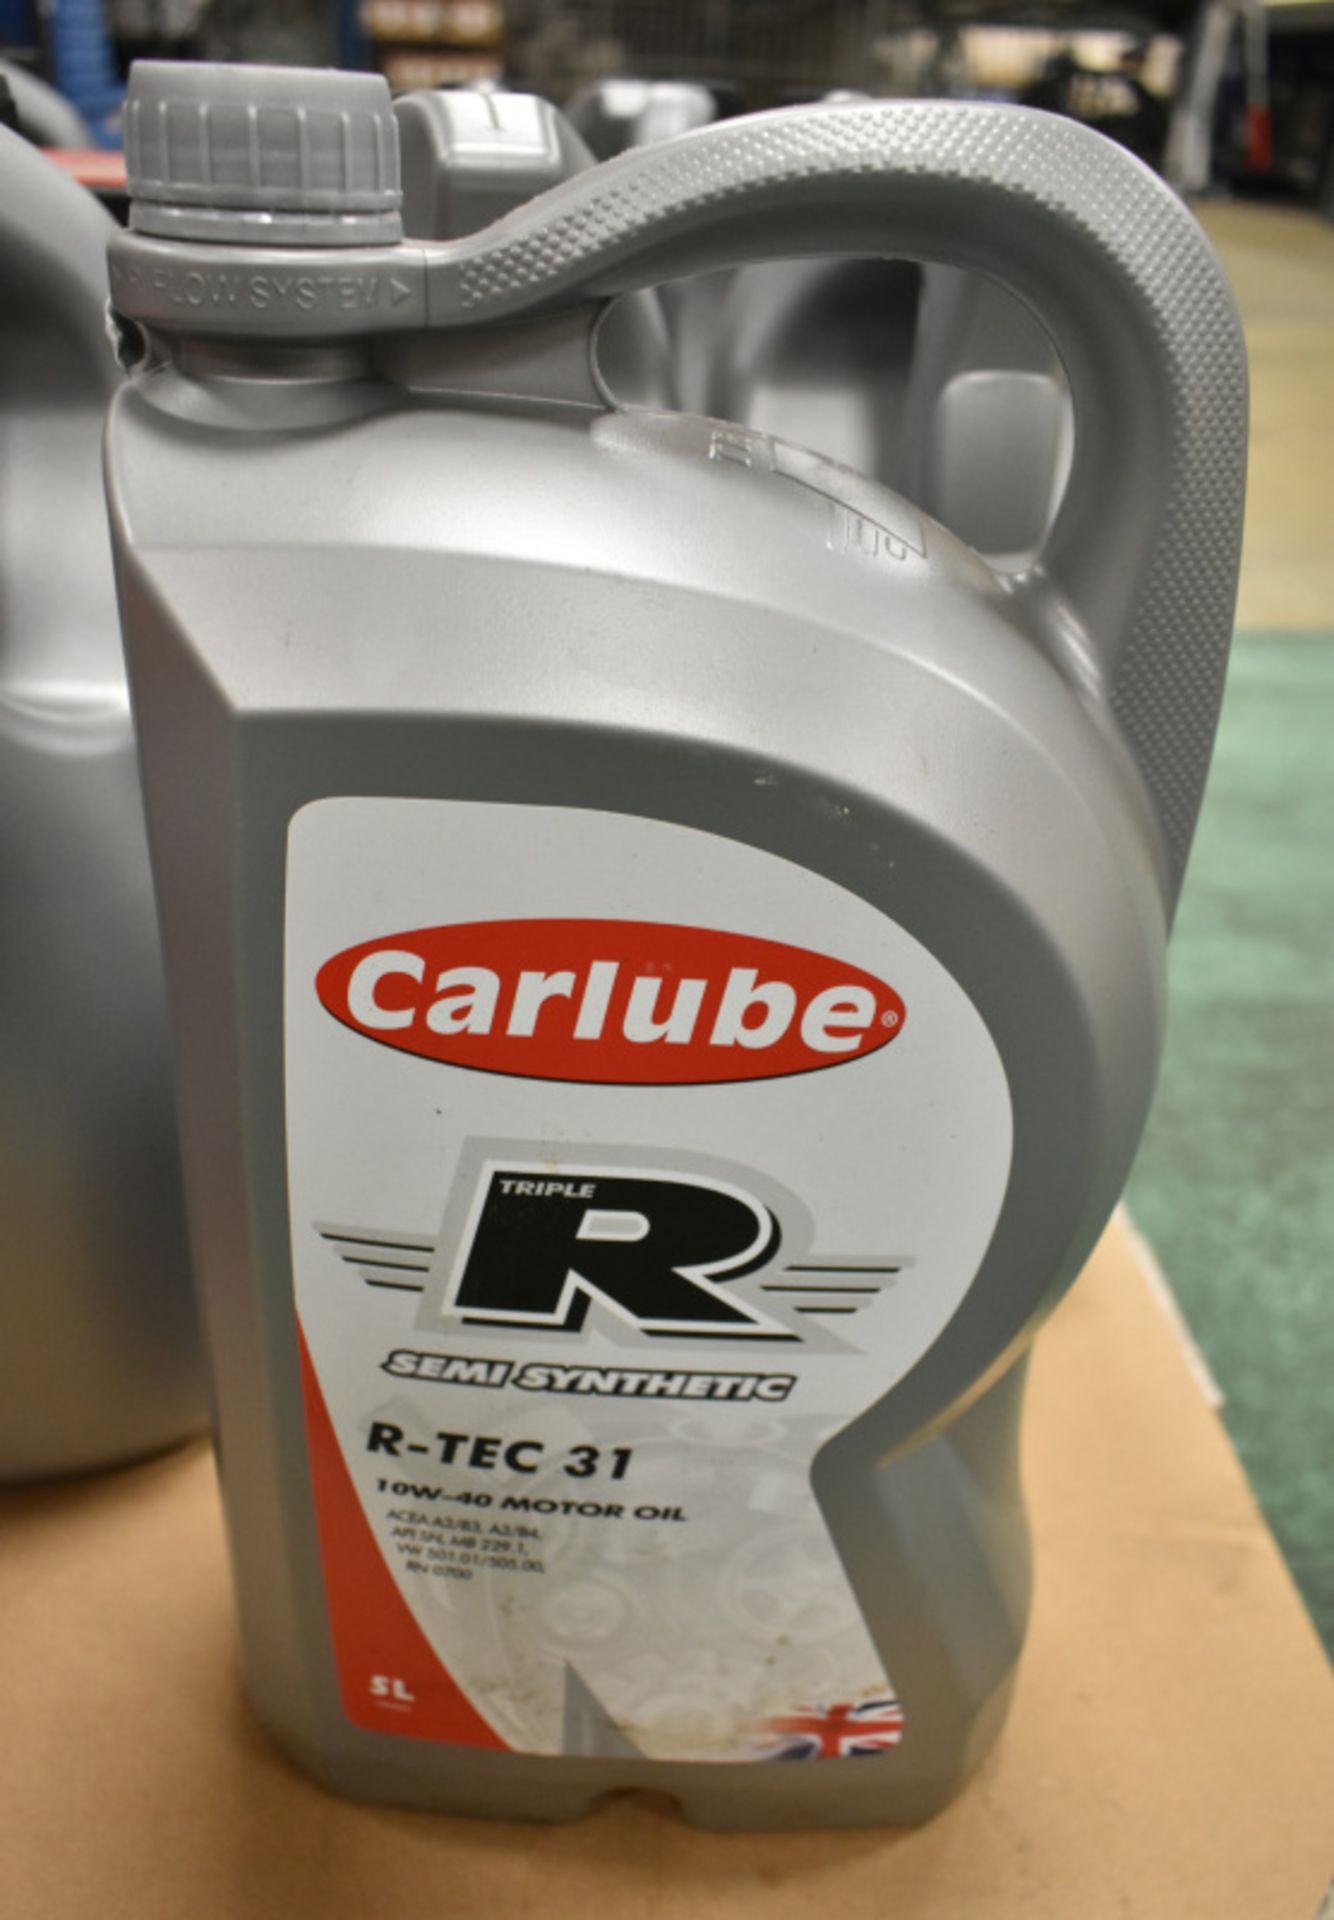 Brake discs - Drumaster, Eicher, Pagid, Engine oil 5LTR Bottles - Carlube RTEC-31 x1 and more - Image 7 of 13